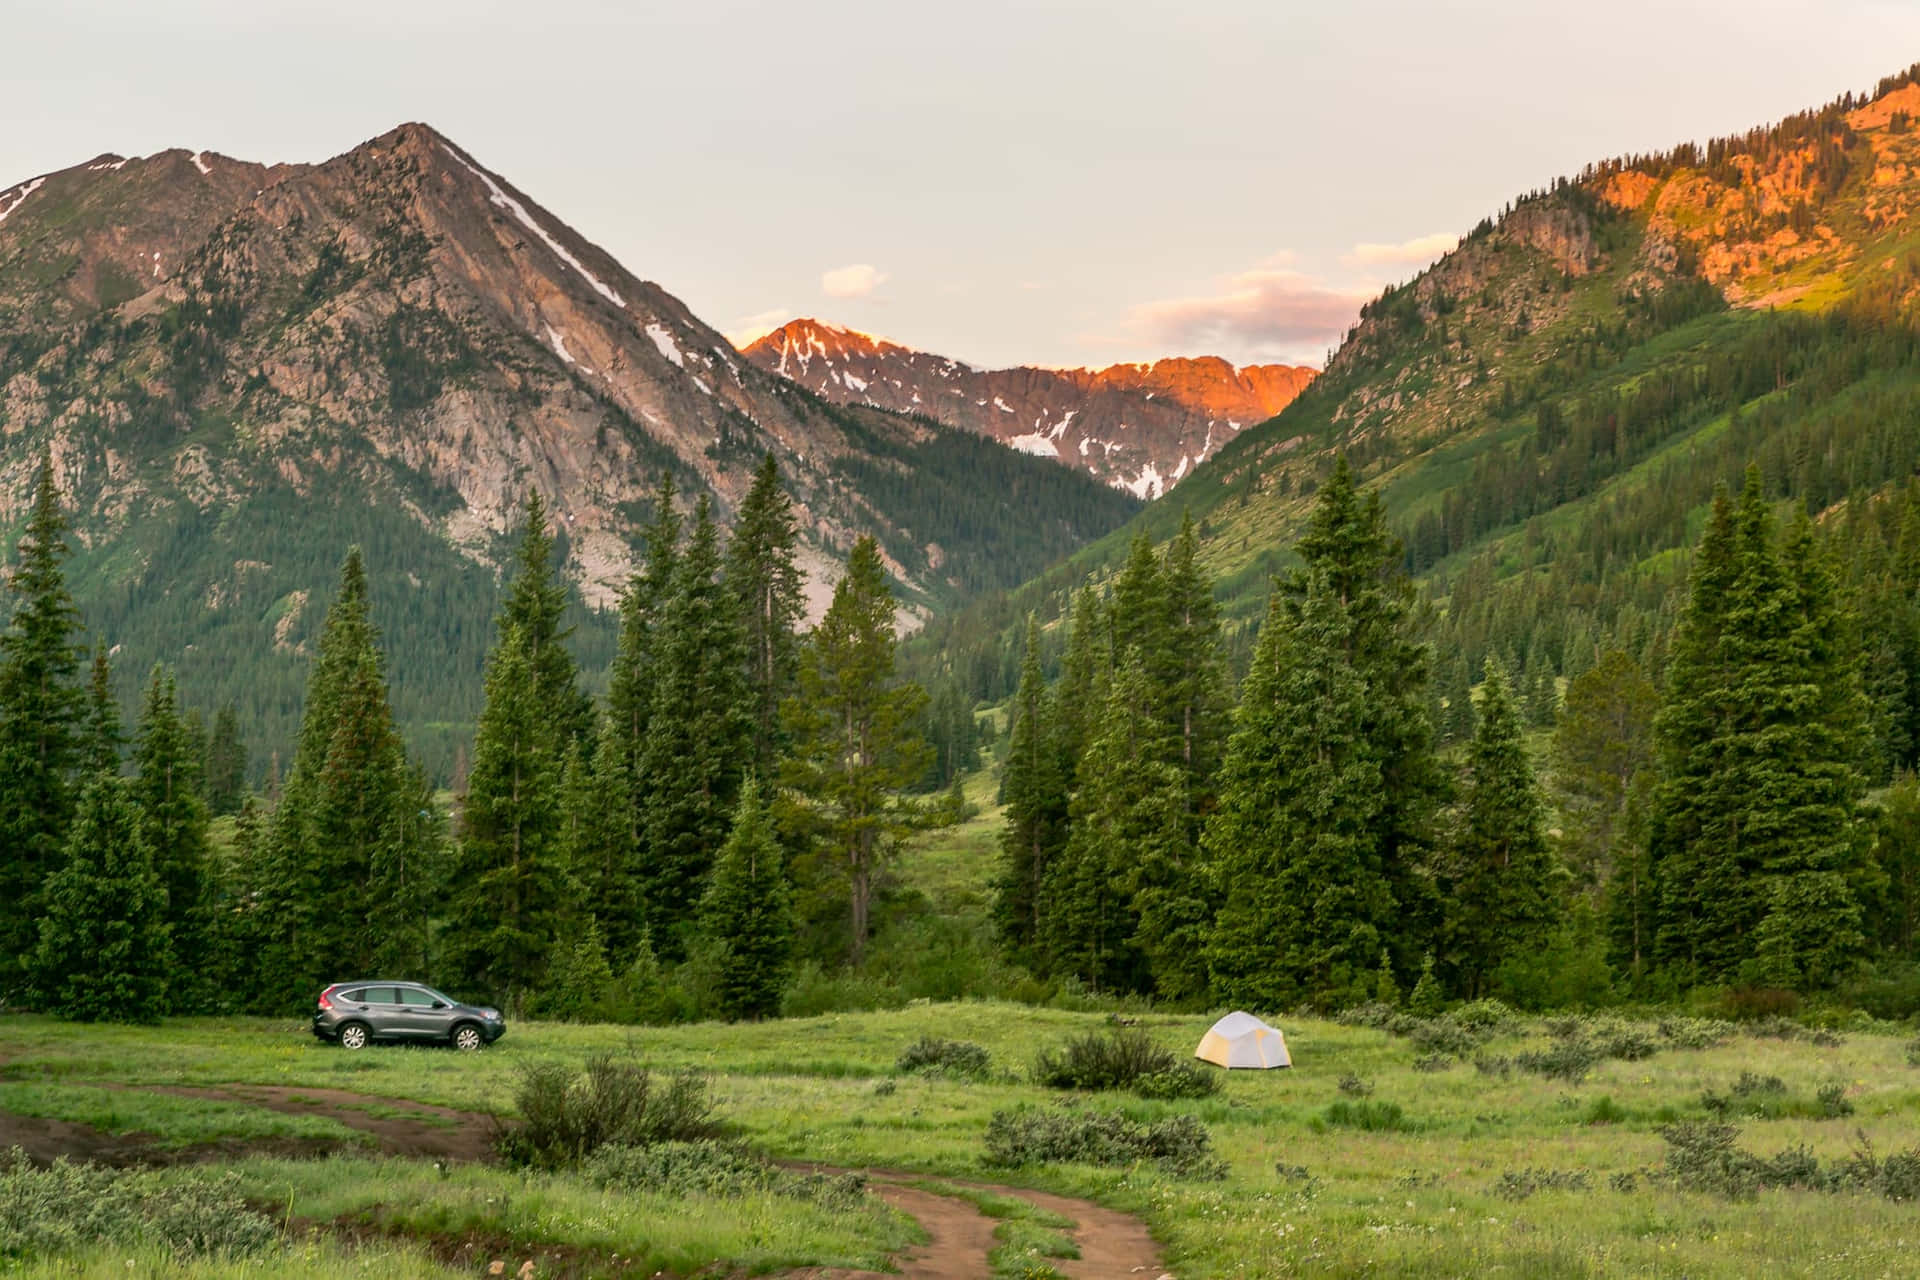 A Camper Is Parked In The Middle Of A Field With Mountains In The Background